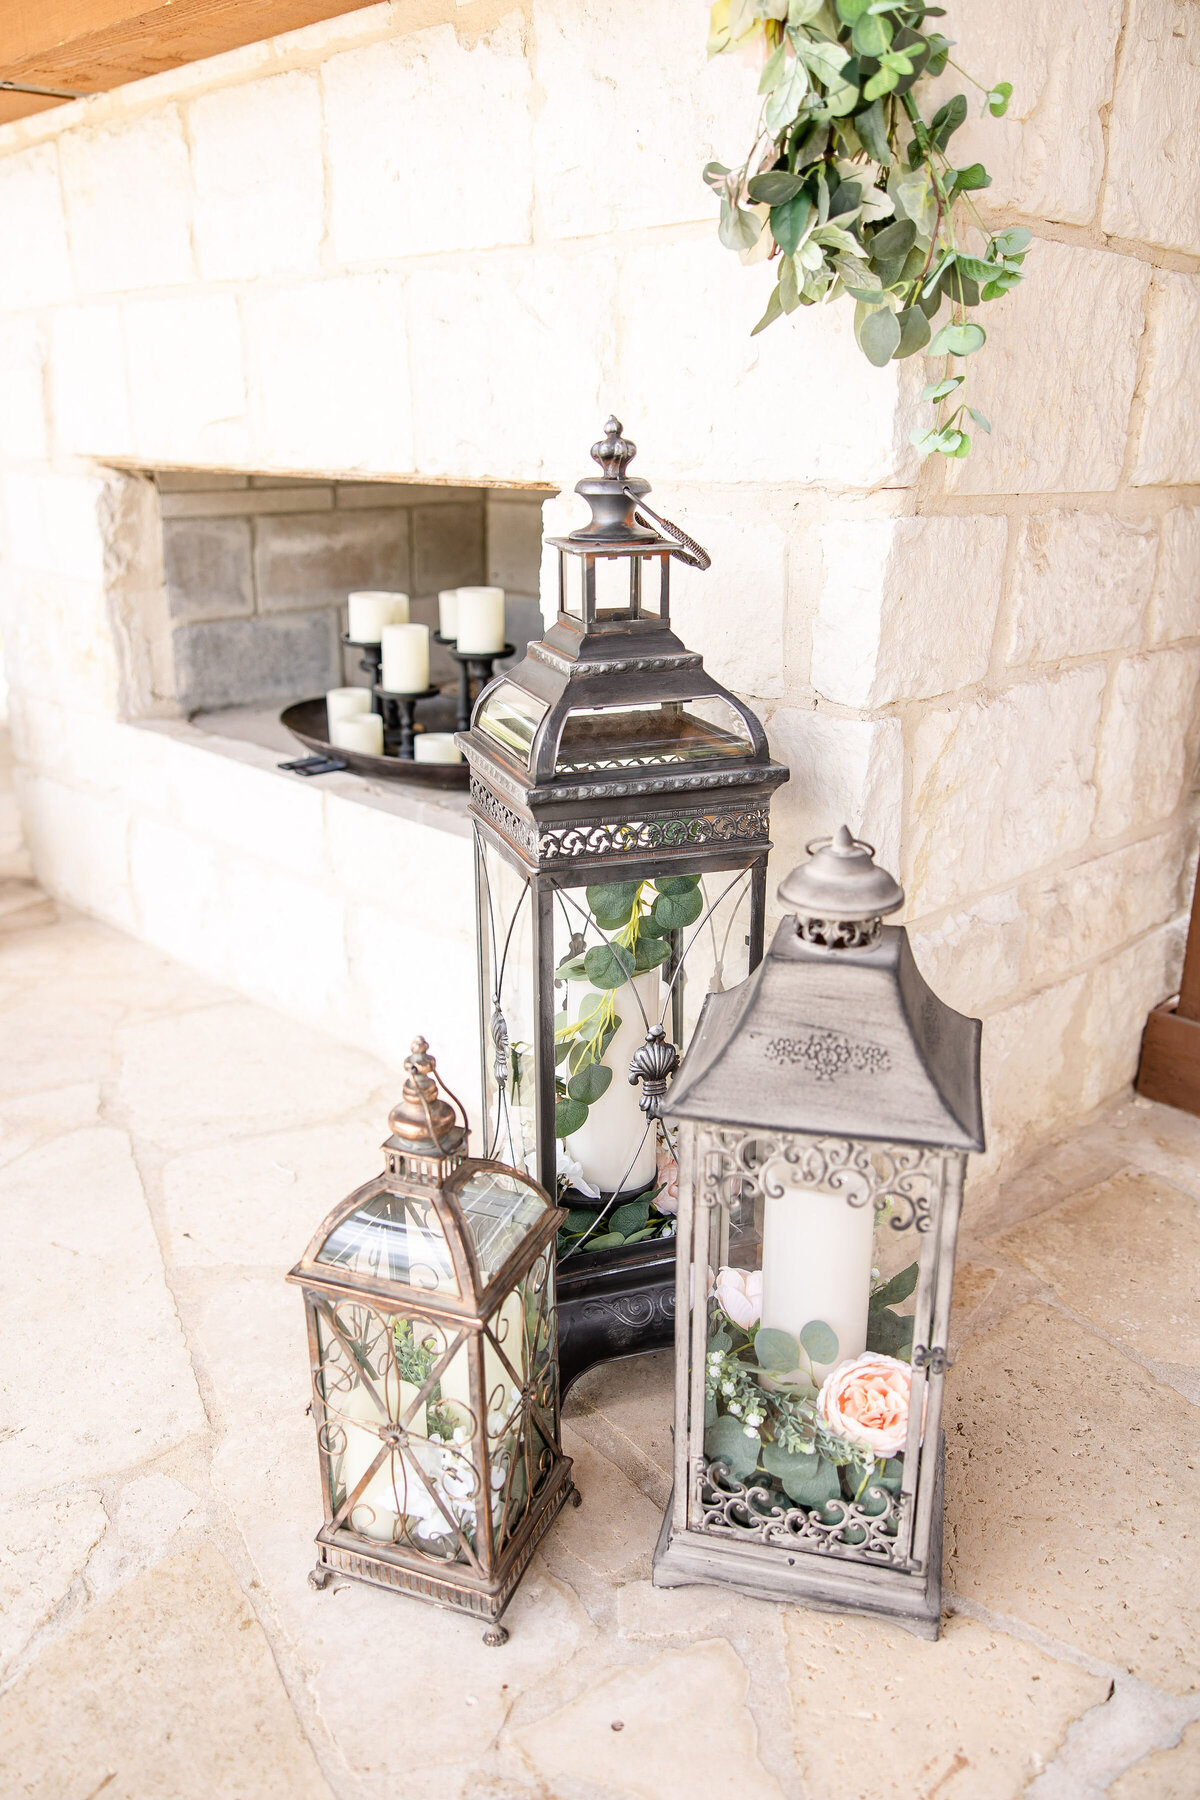 wedding photographer in Texas captures 3 vintage lanterns by fireplace at ceremony site Milestone New Braunfels Texas